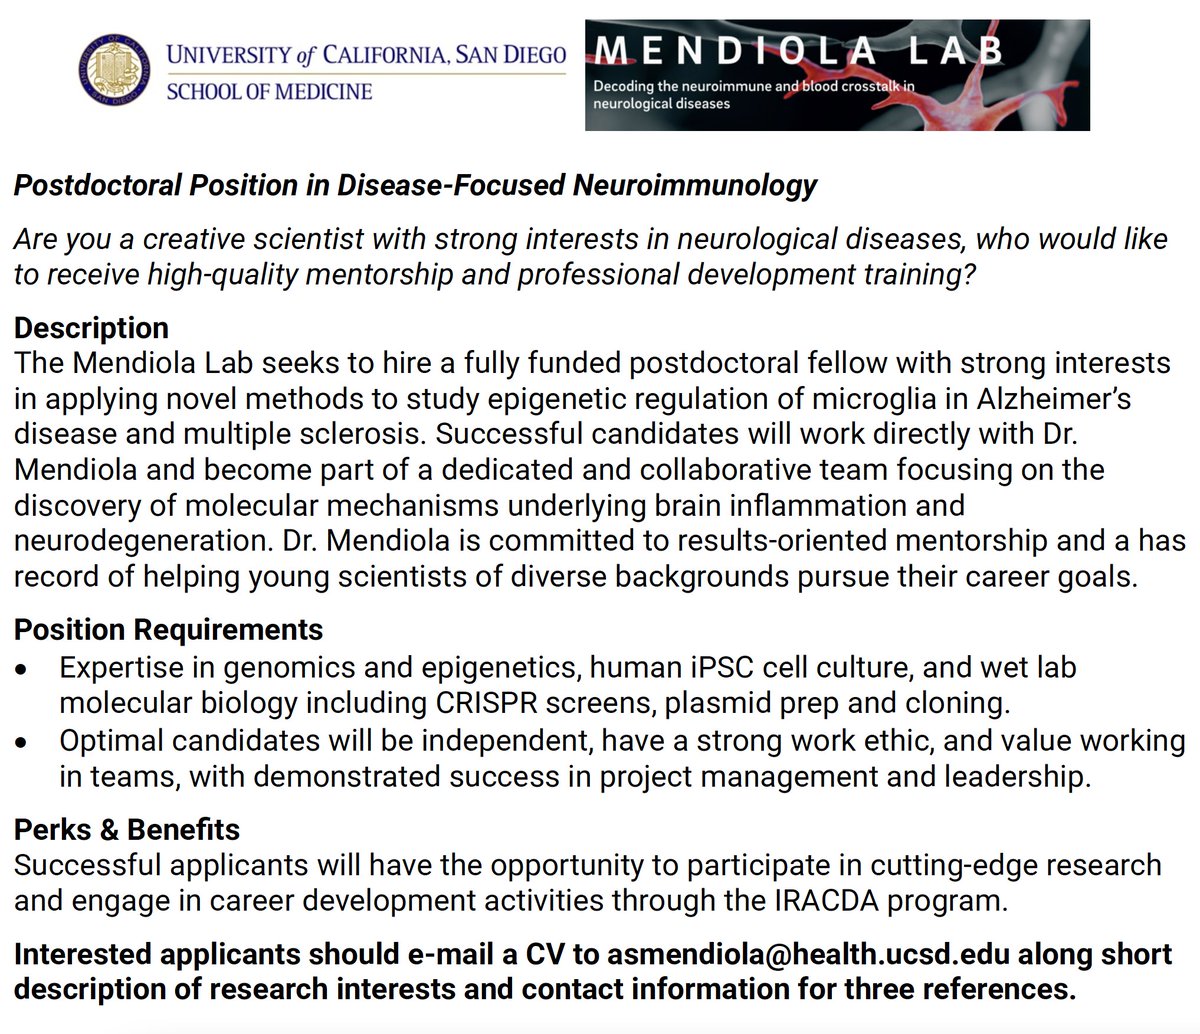 Postdoc opening @UCSanDiego: Apply now to join our neuroimmunology lab! Ideal for new/recent grads w/ passion for innovation and mechanisms of neurological disease. Expertise in Molecular Bio & iPSCs needed. Benefit from dedicated PI mentorship and career development activities.